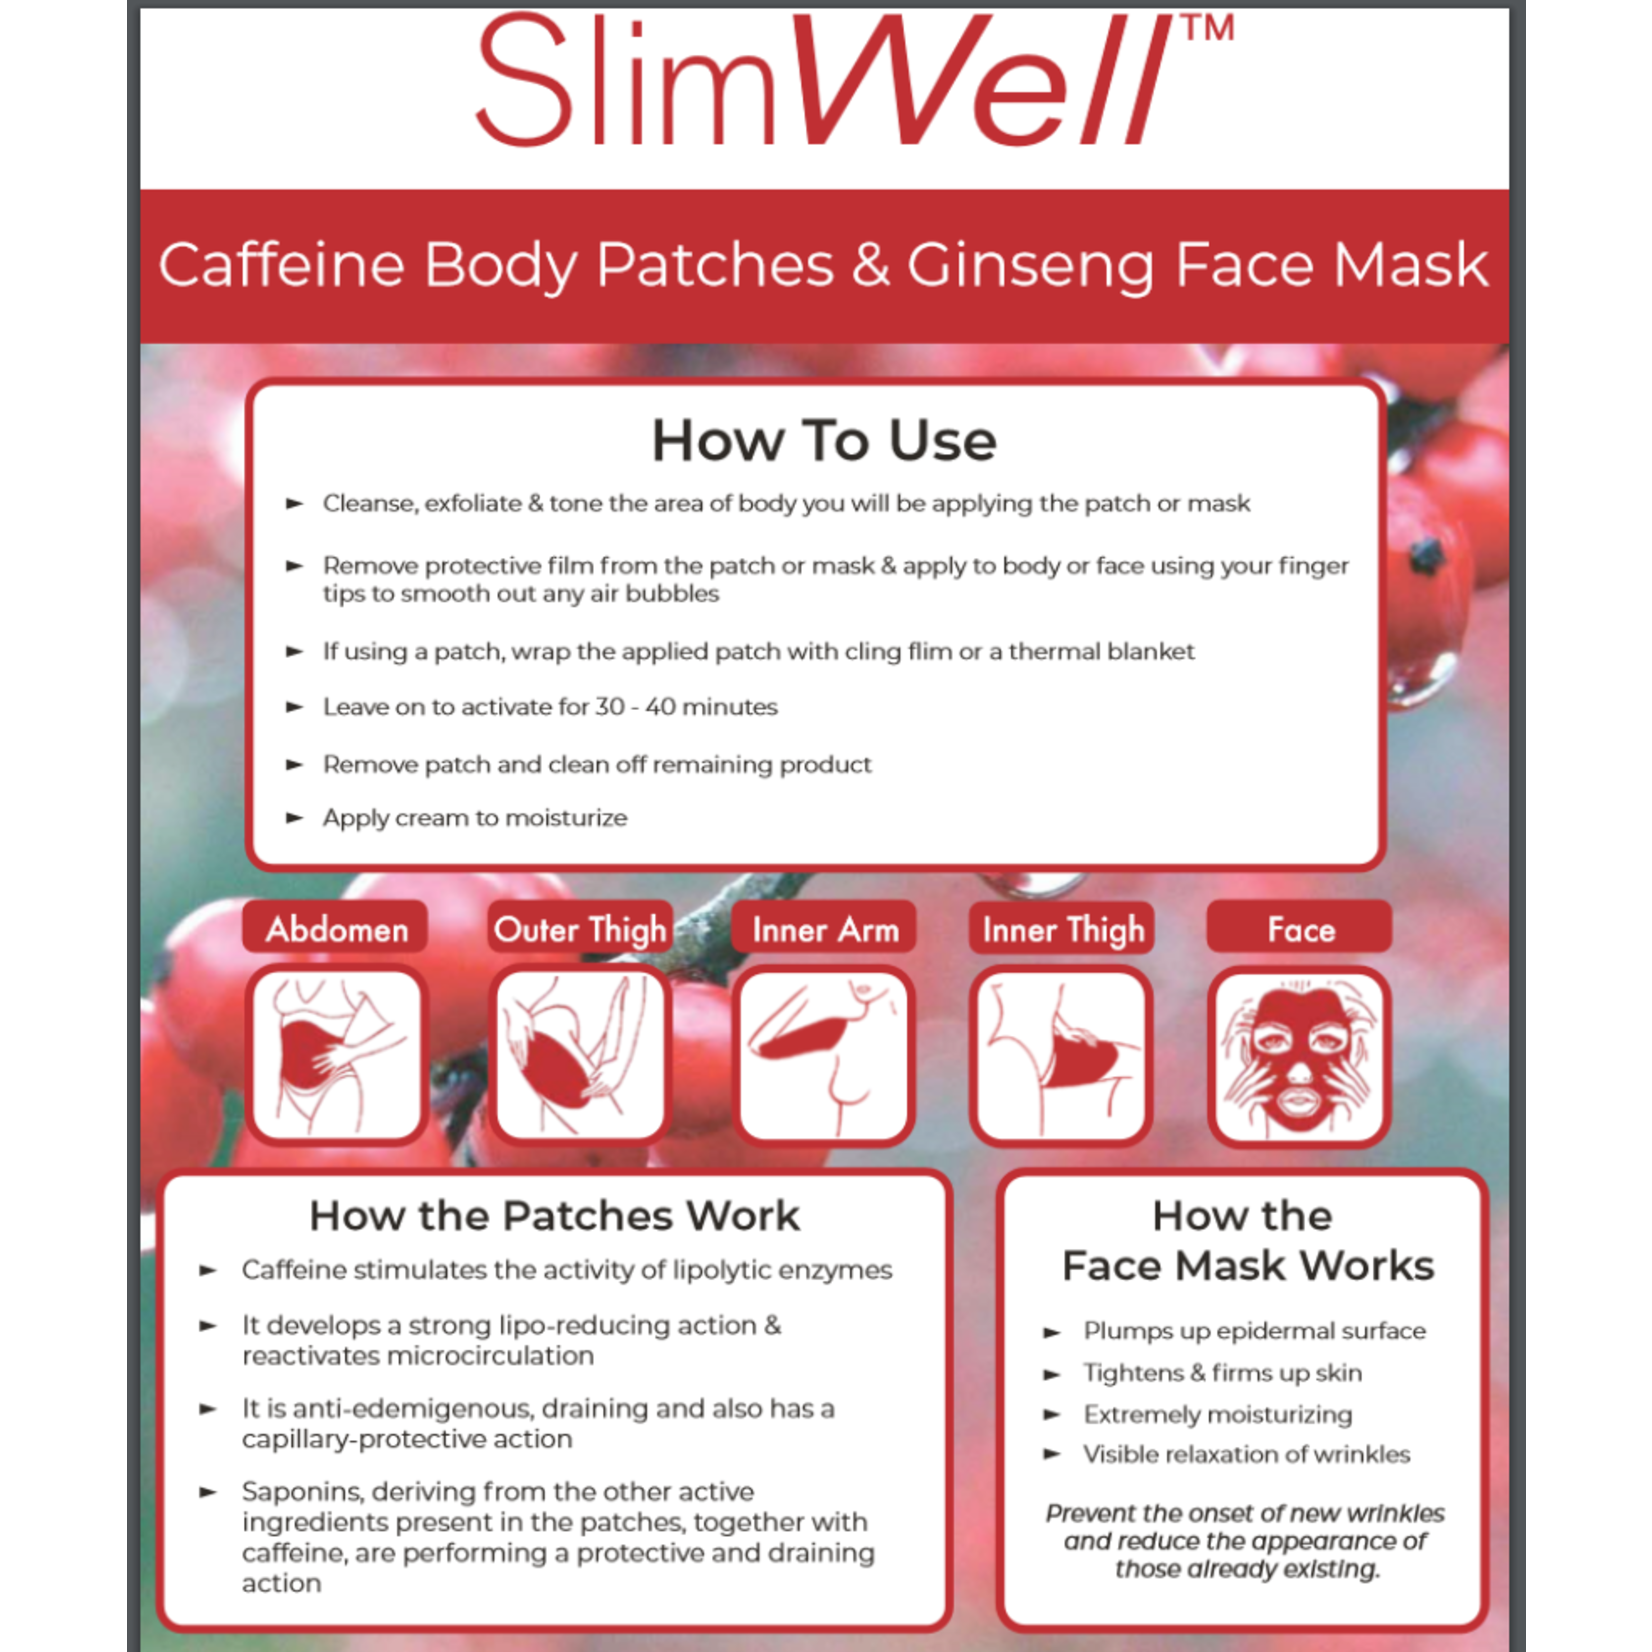 RED FIT ABDOMEN - RED FIT PATCH RED LIGHT REDFIT WRAP SLIMWELL PATCHES - Caffeine Abdomen Contour Body Patch